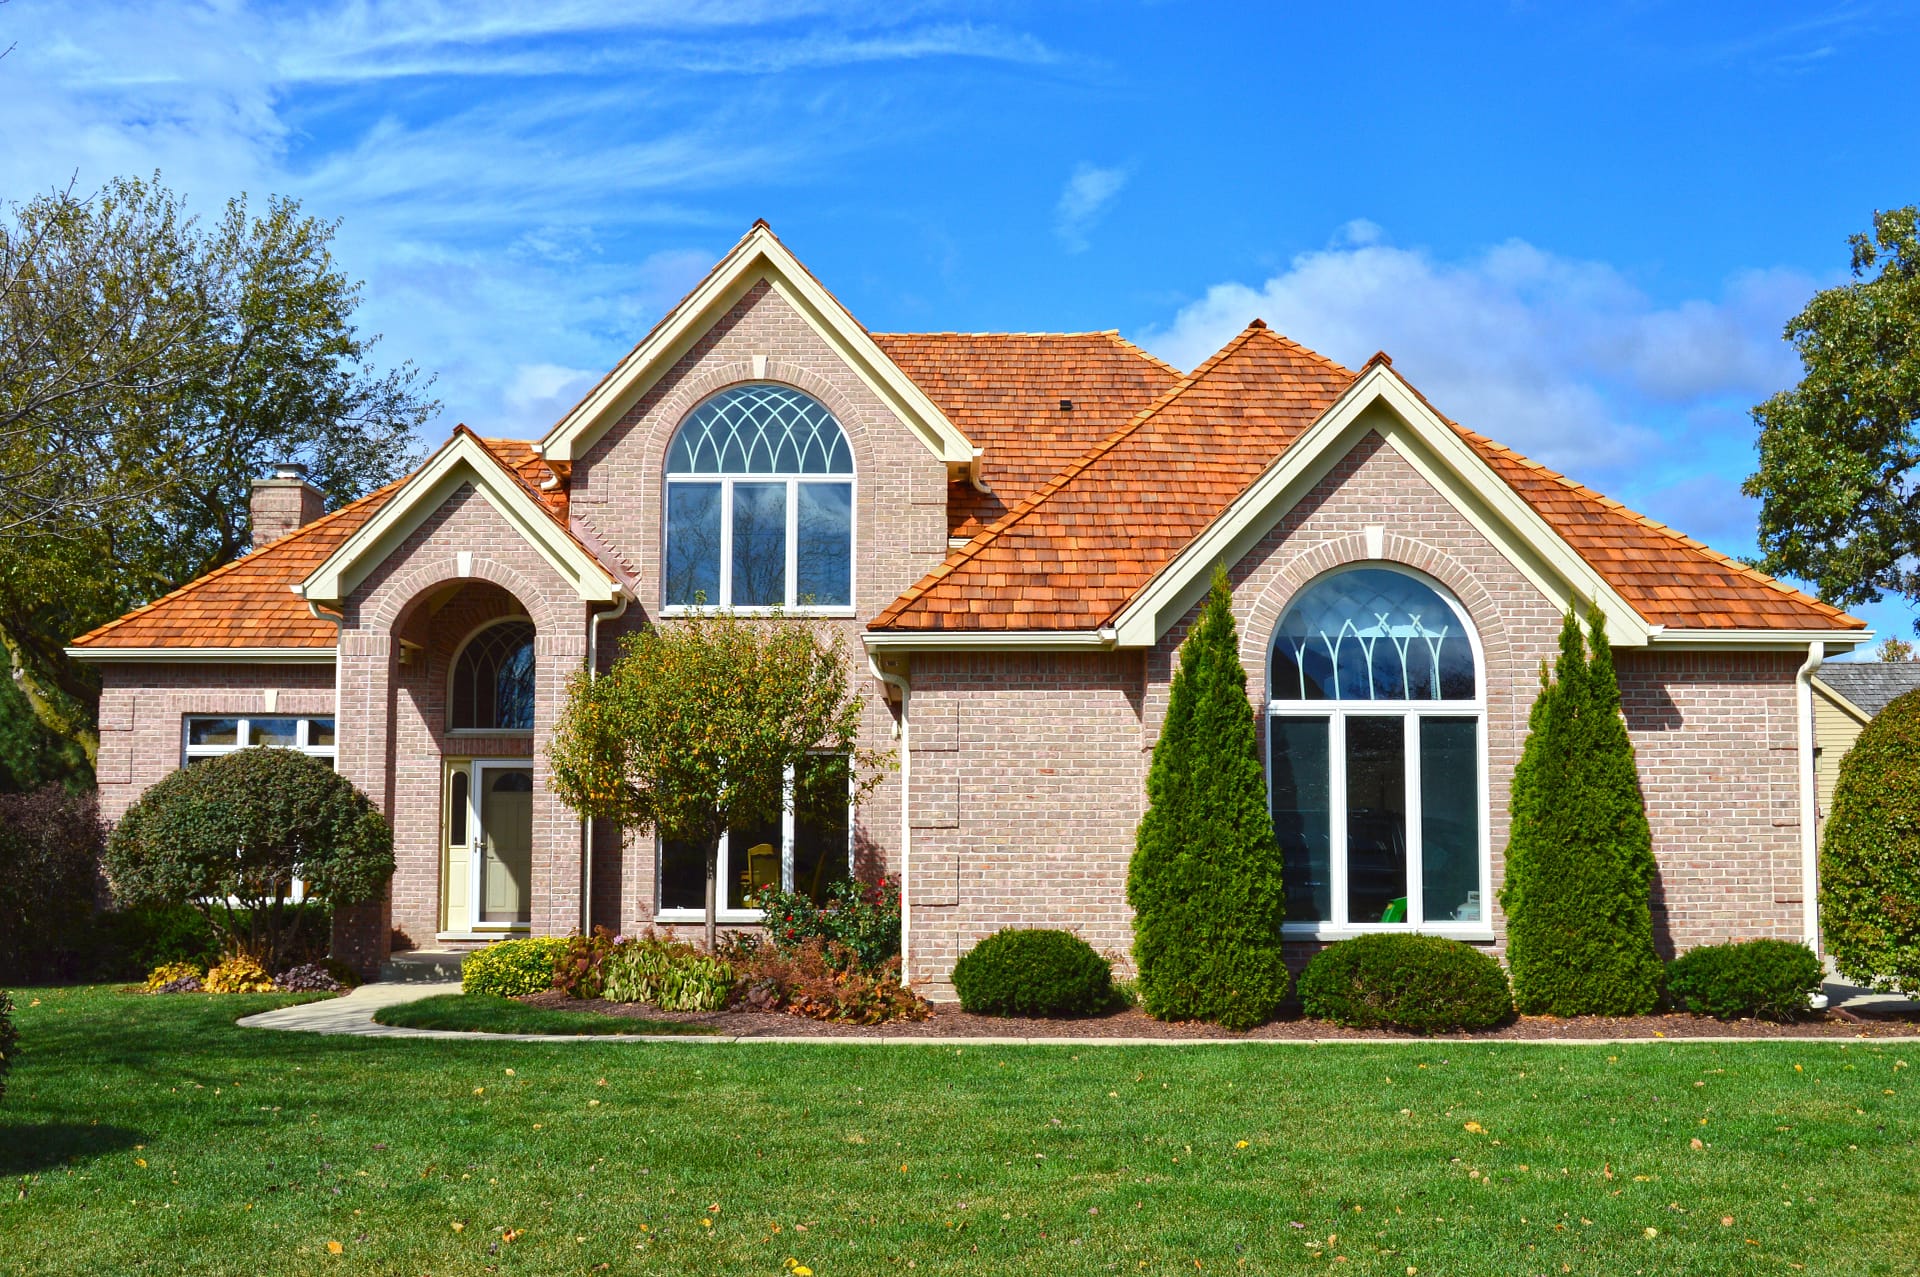 Get Fast & Reliable Roof Replacement in Burr Ridge, IL